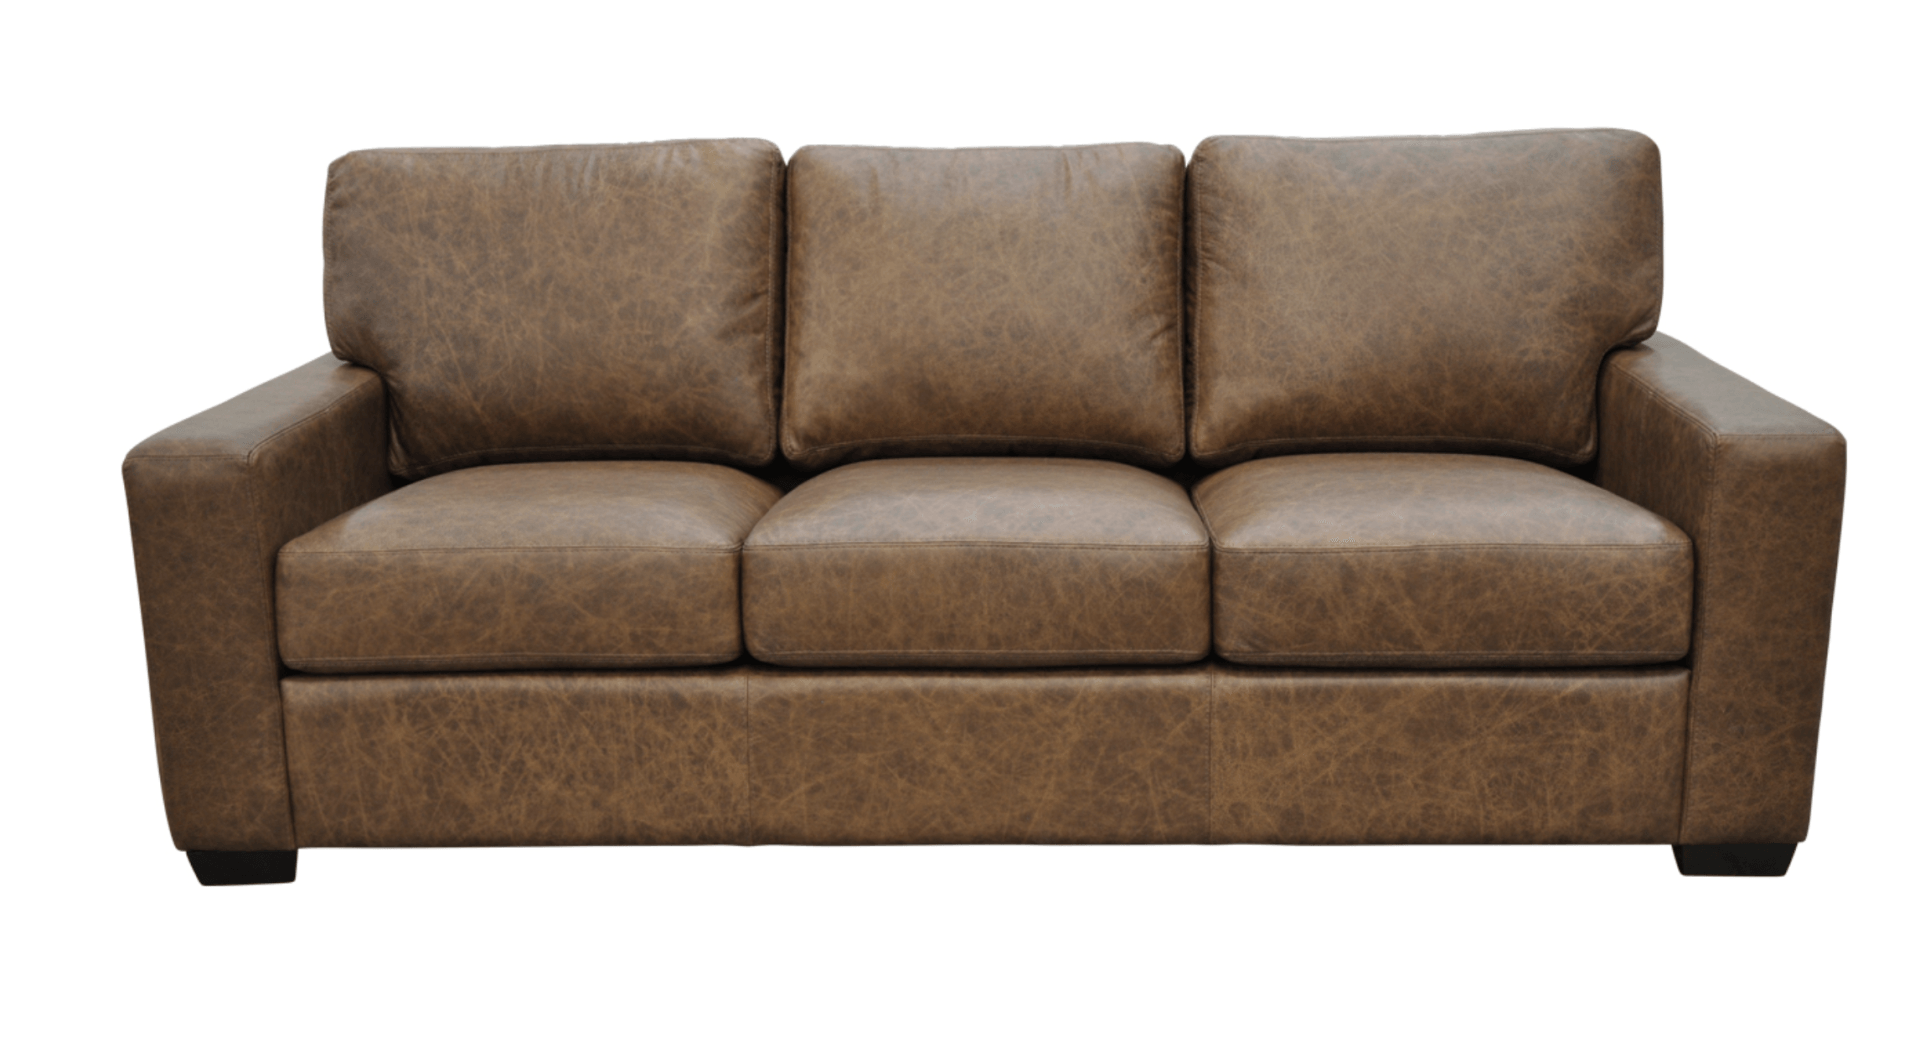 a brown leather couch is sitting on a white background .